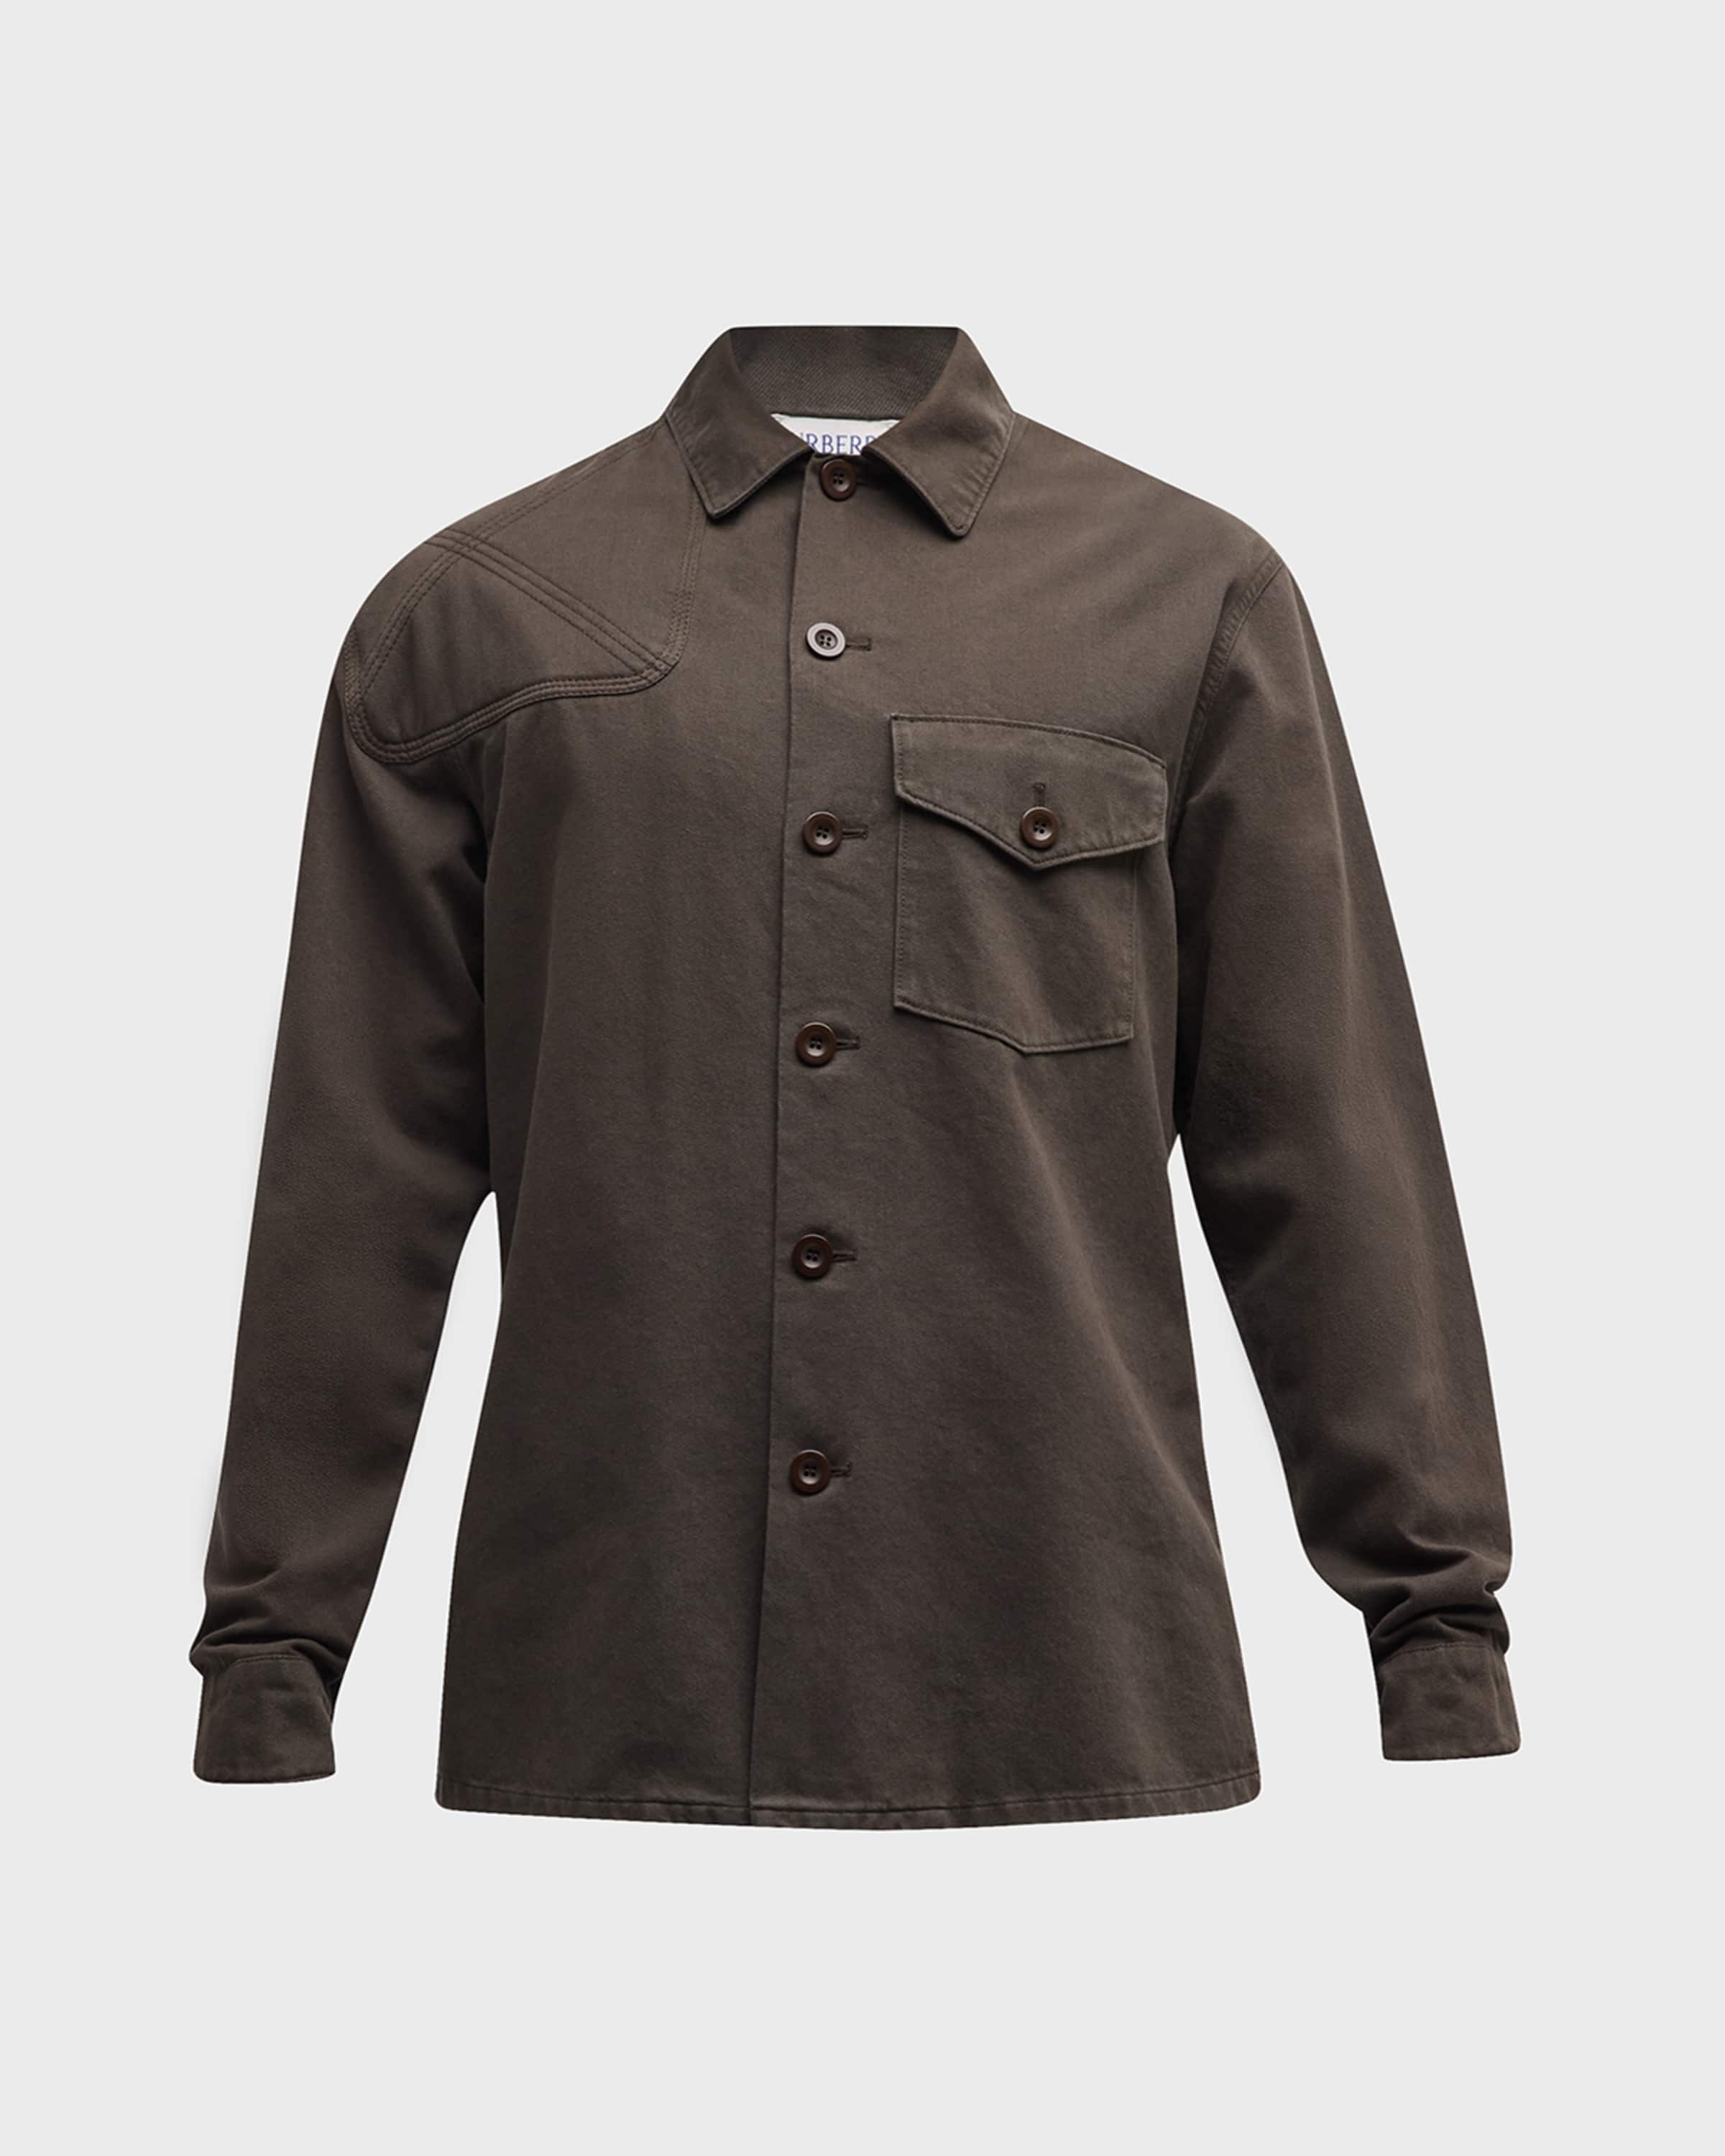 Men's Twill Shirt with Embroidered Patches - 1